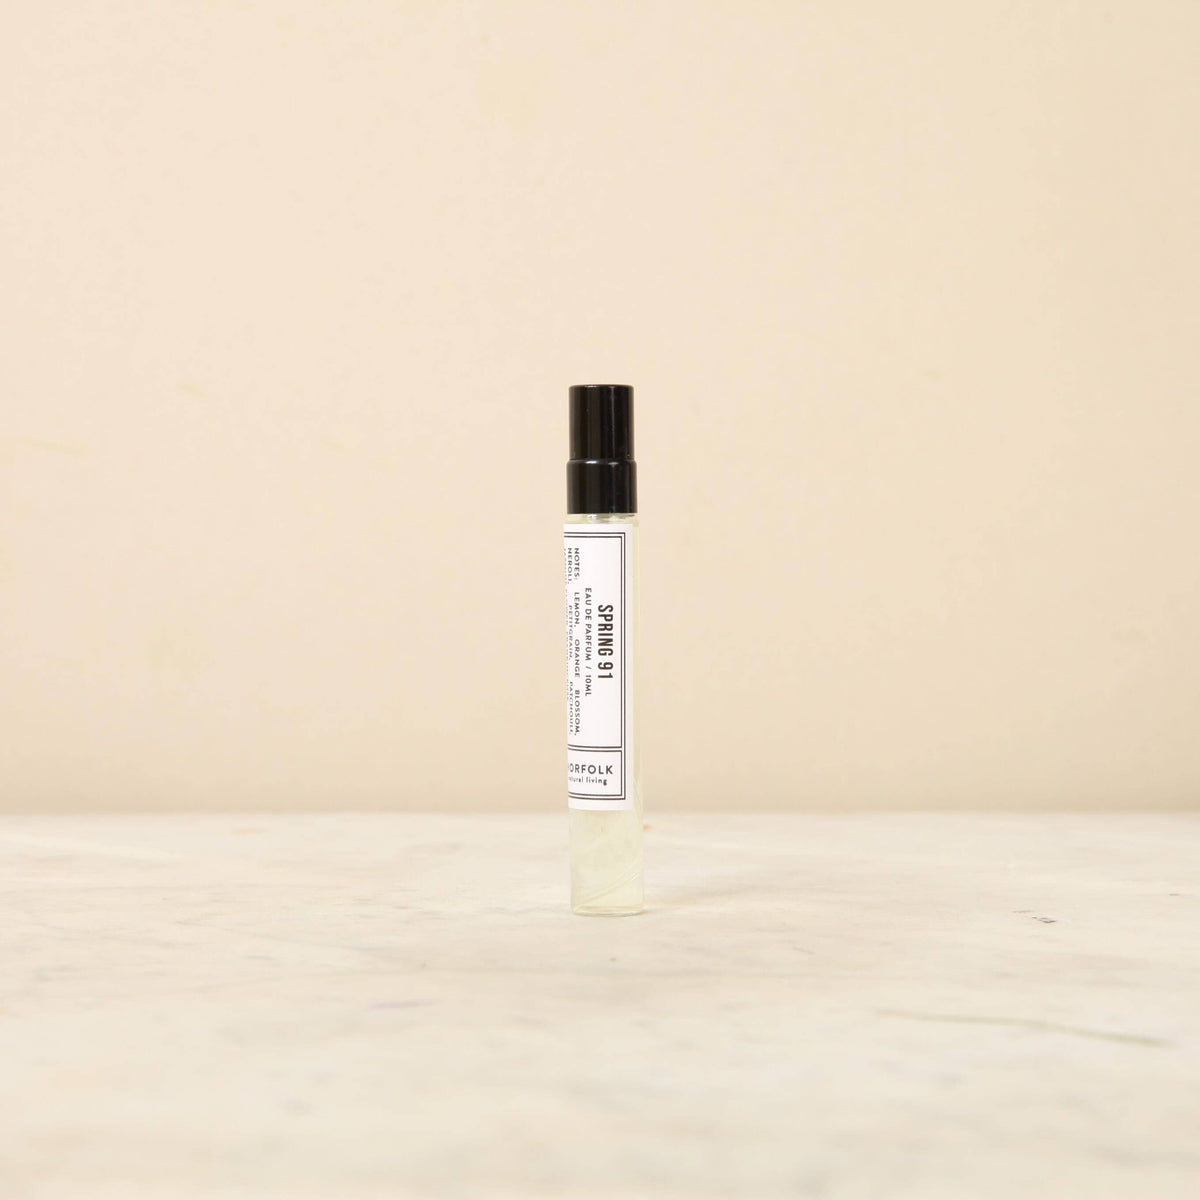 A small cylindrical spray bottle of unisex parfum is centered on a light-colored surface in front of a plain beige background. The bottle has a black cap and a white label with black text that reads "Days of Spring 91." The overall aesthetic, reminiscent of Norfolk Natural Living perfumery, is minimalistic.